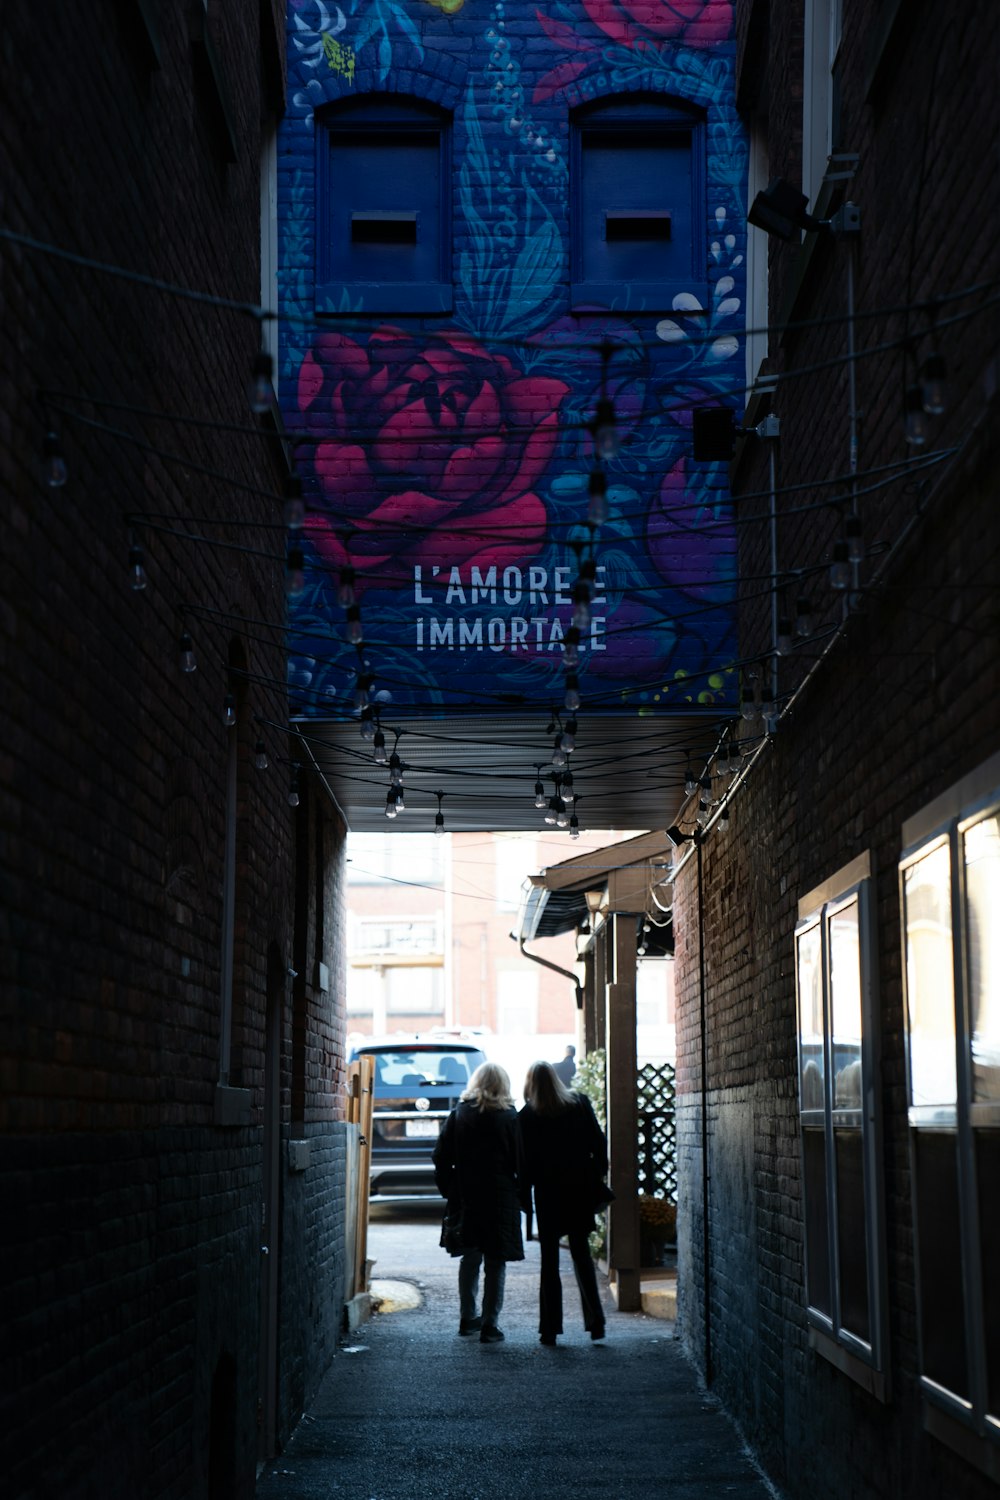 two people walking down a narrow alley way